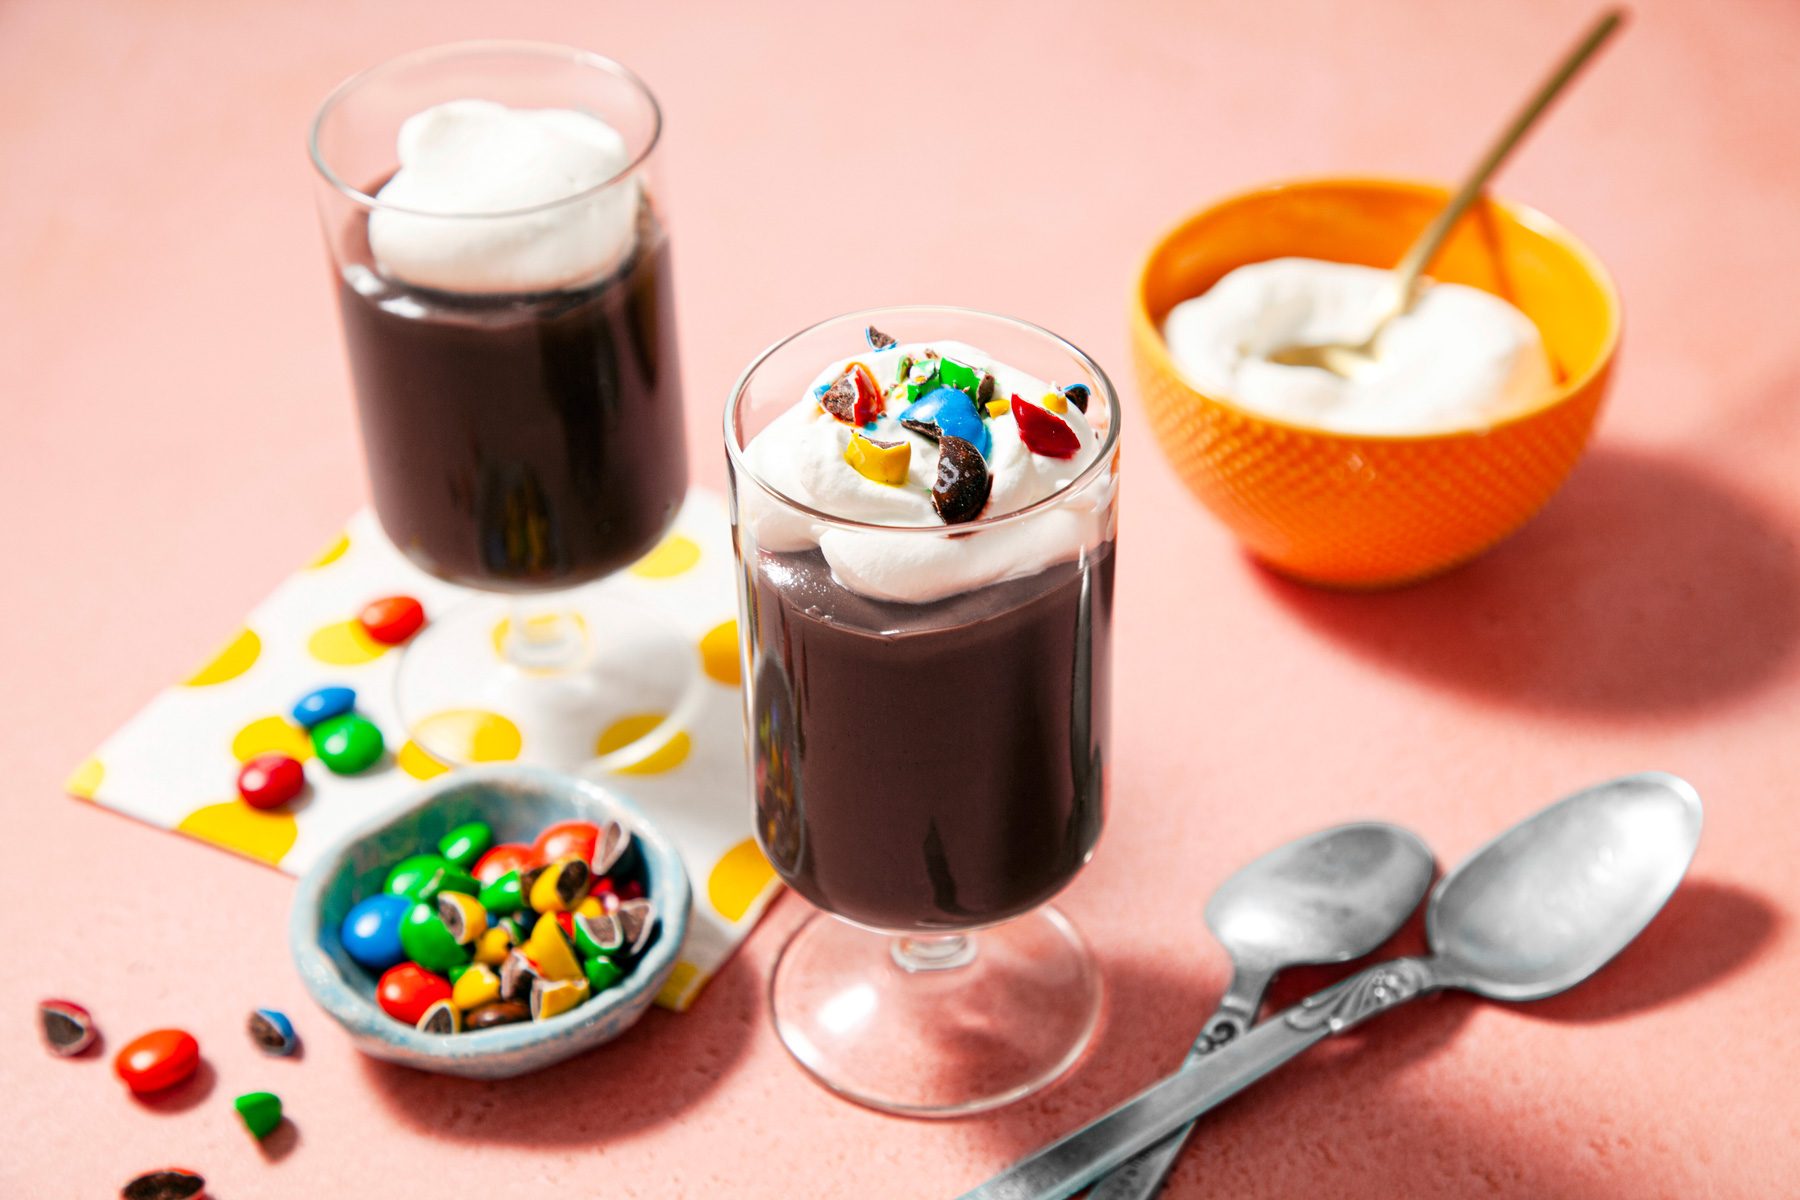 Two glasses of homemade chocolate pudding with whipped cream and candy